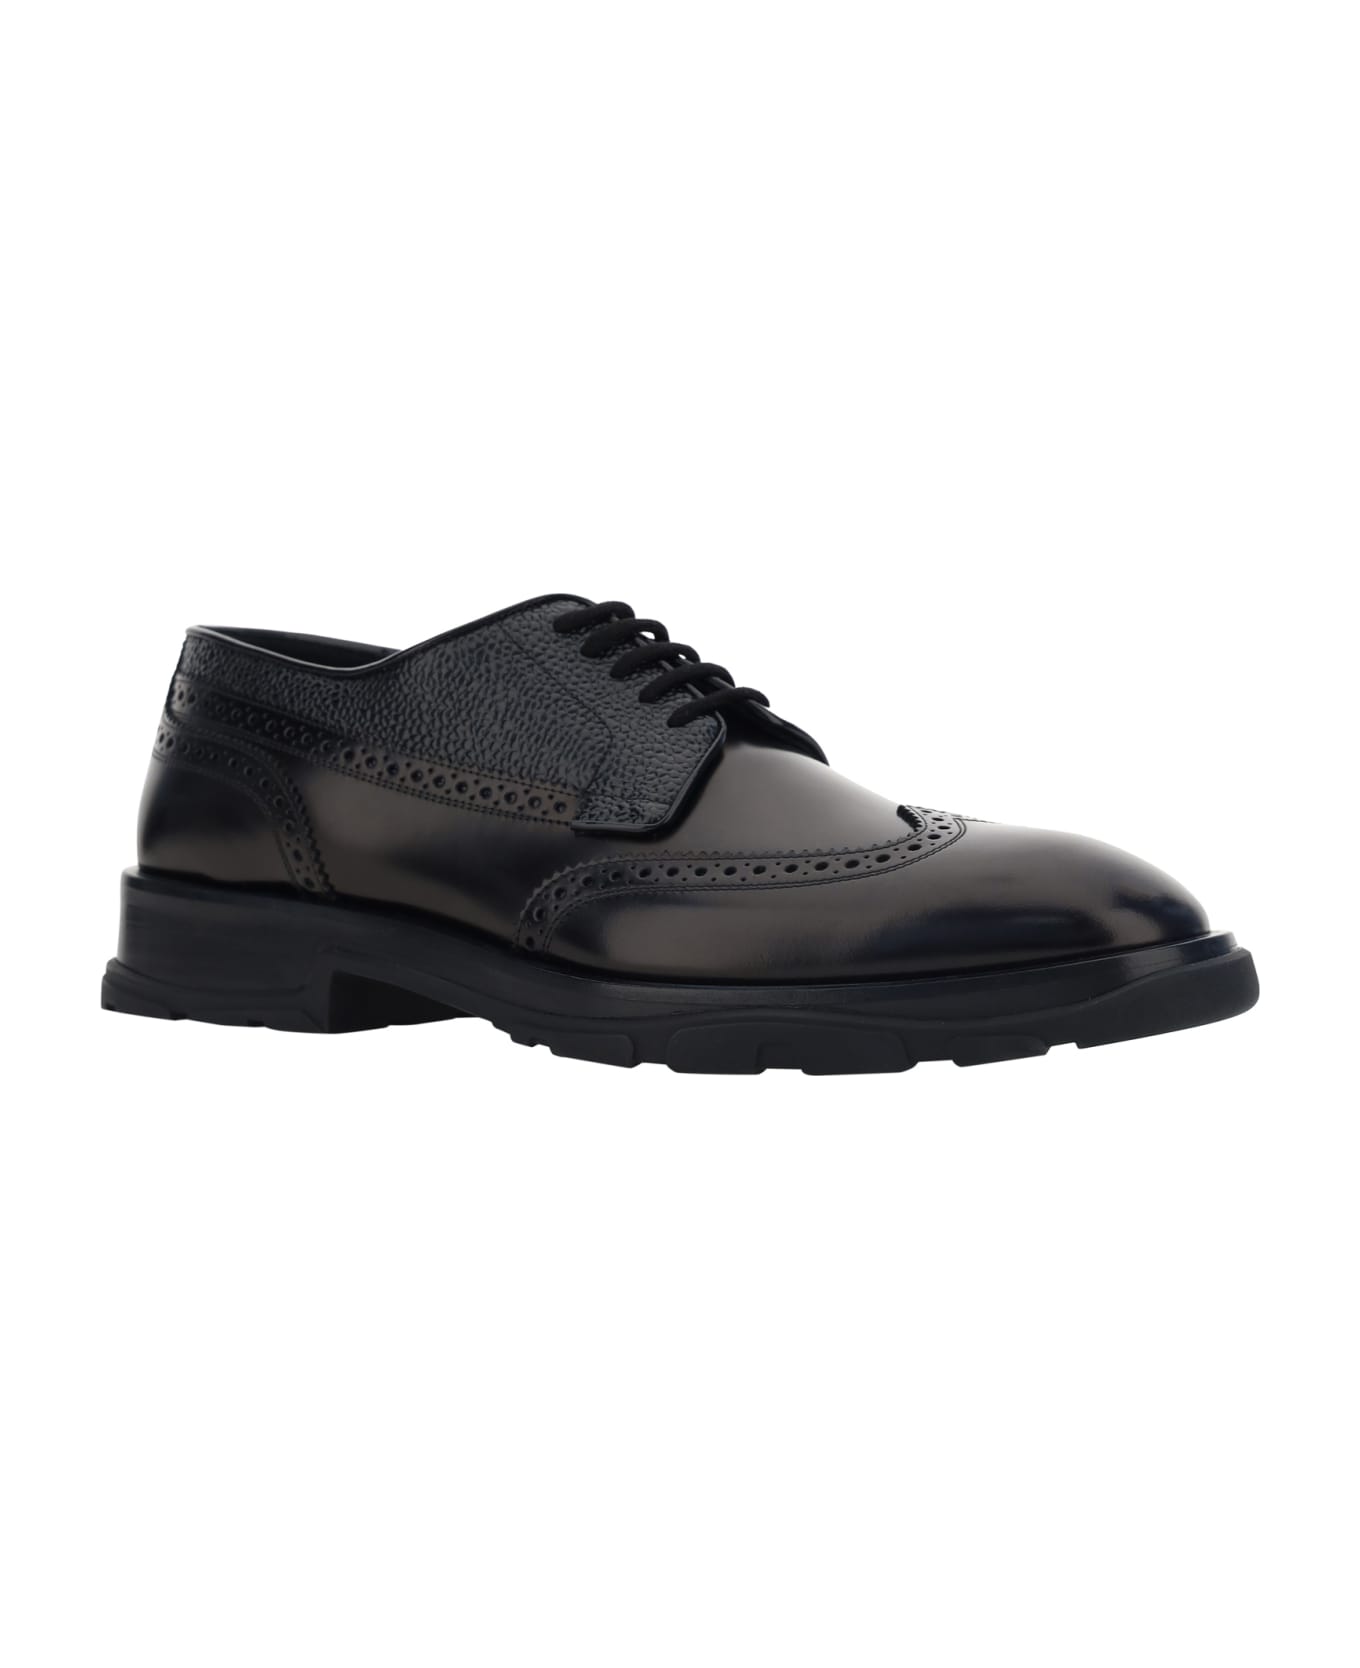 Alexander McQueen Brogues Leather Lace Up Shoes - Black ローファー＆デッキシューズ